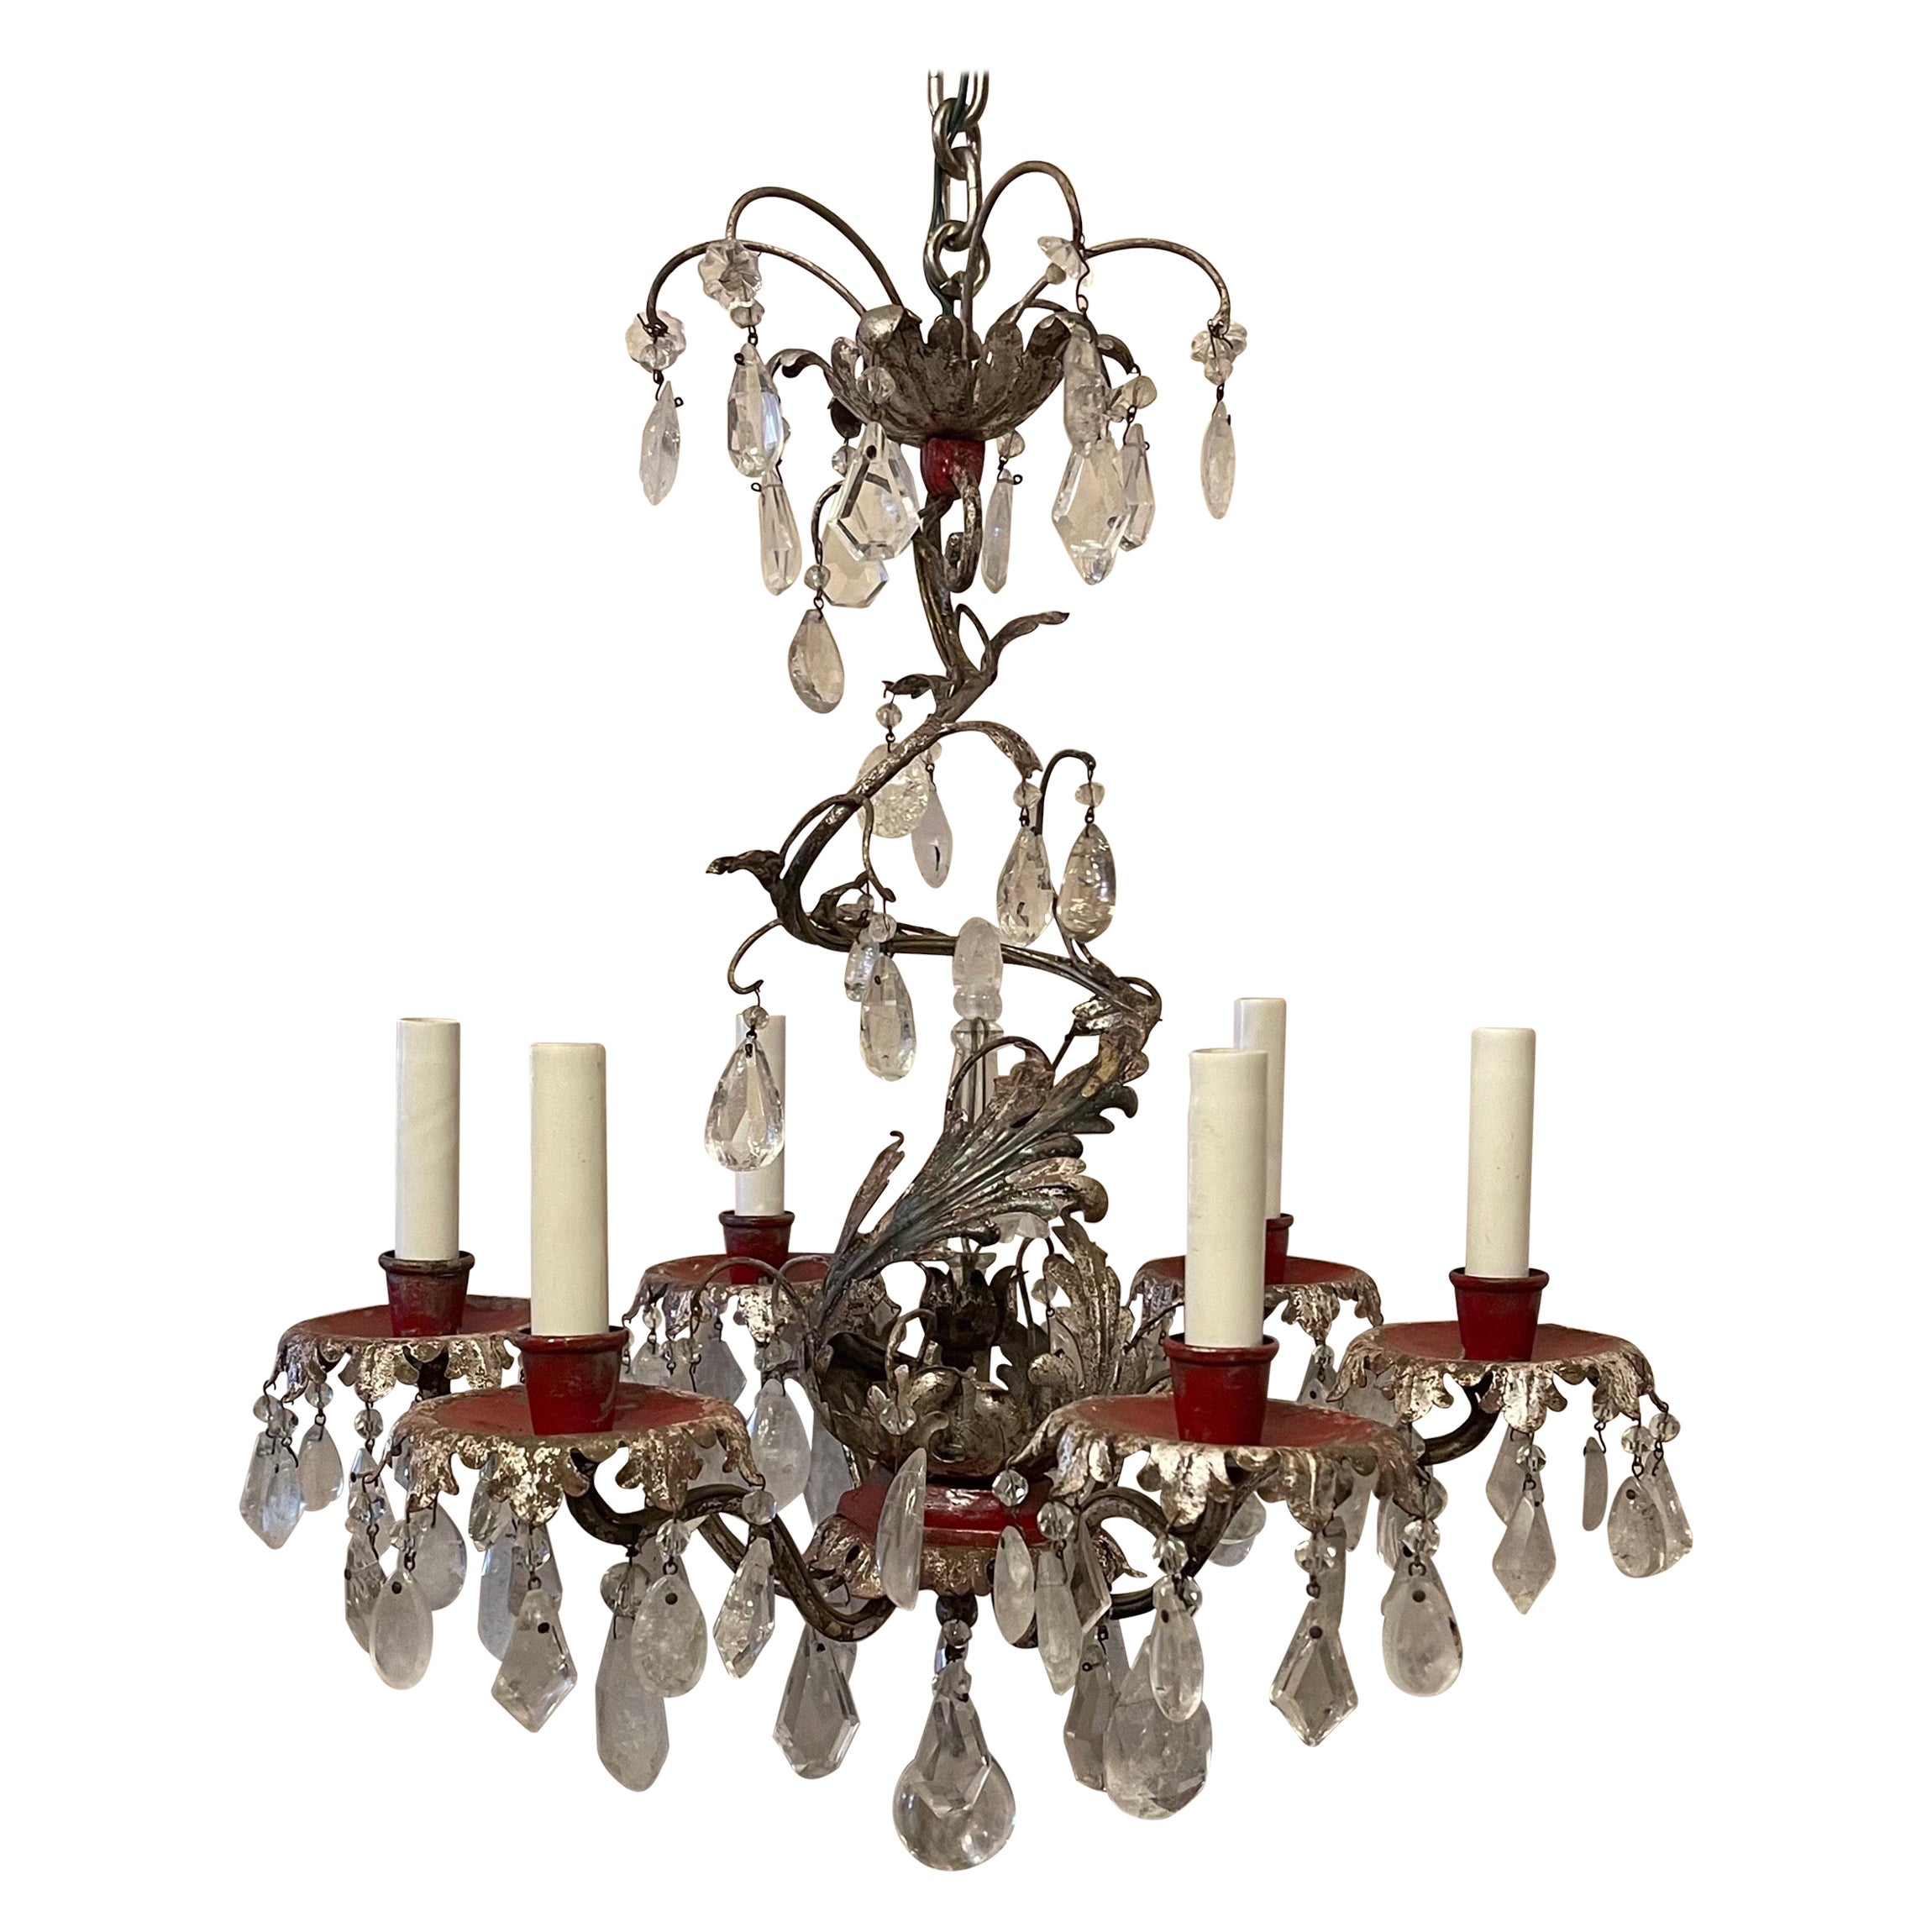 Wonderful French Silver Red Gilt Bagues Rock Crystal Chandelier E.F. Caldwell